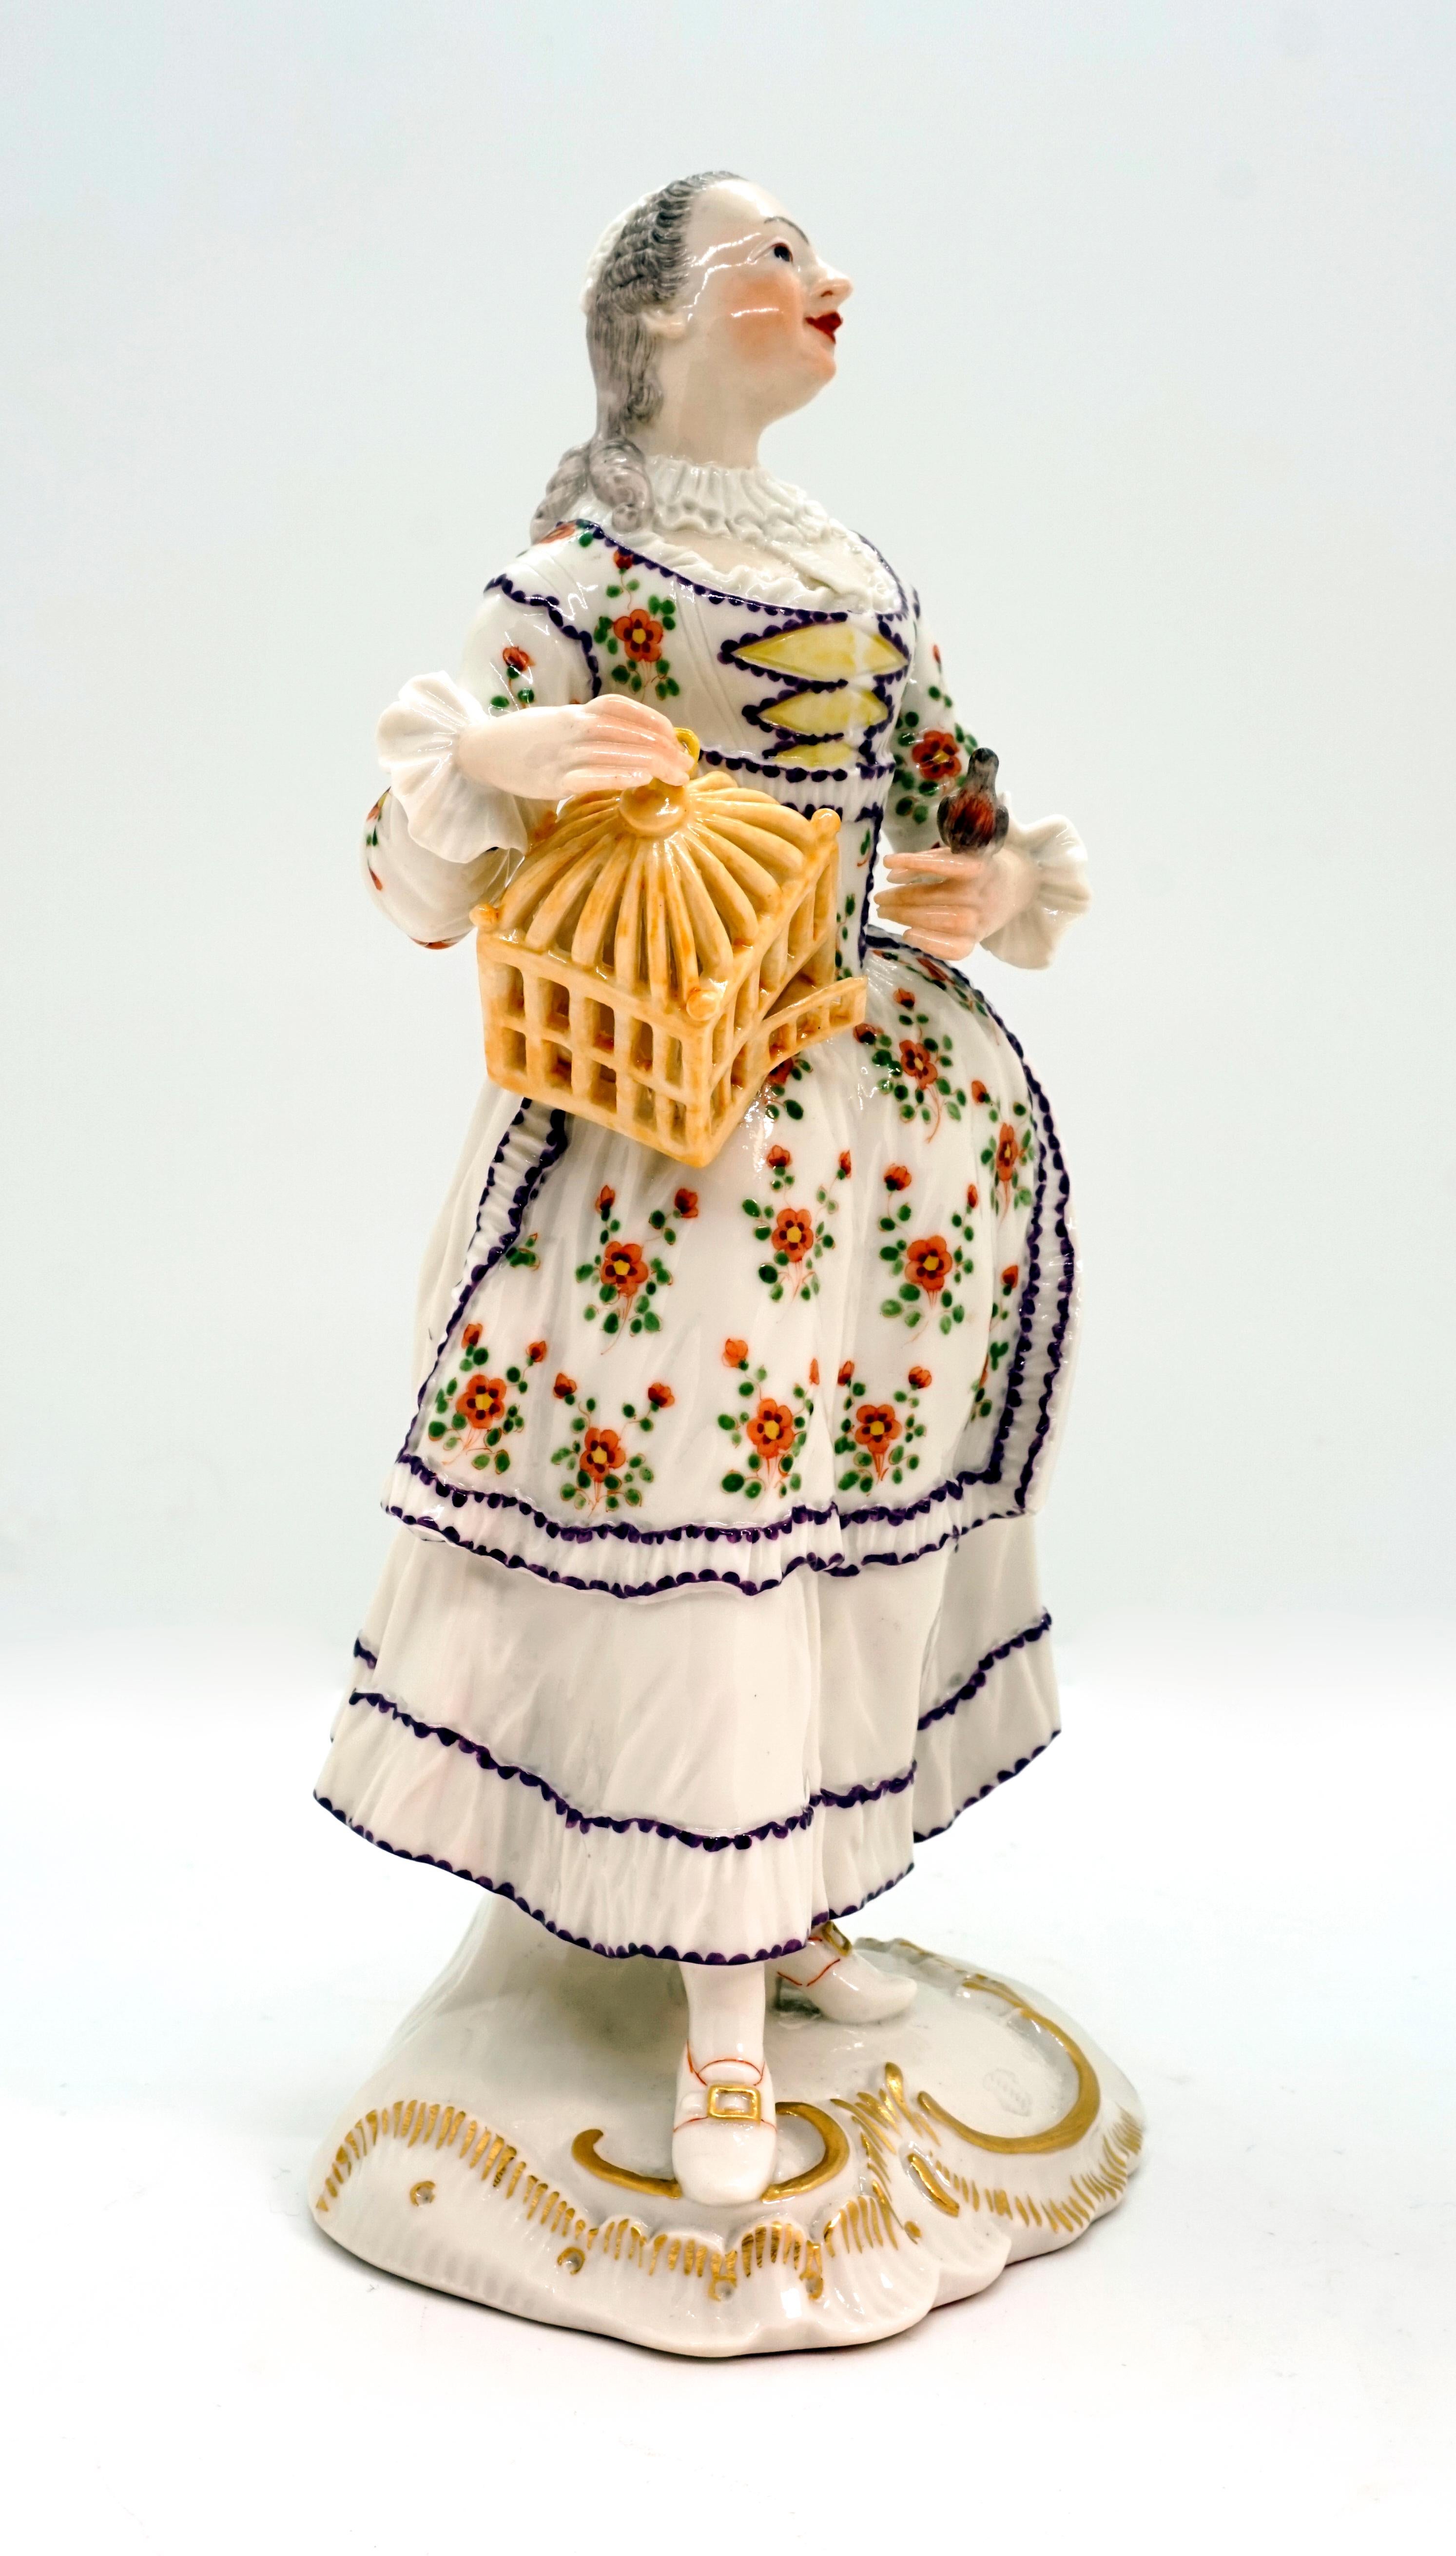 Very rare figurine from the former manufacturer Frankenthal Germany.
The lady, dressed in Rococo style: white dress with flowered bodice and apron, white bonnet, is holding an open birdcage with her right hand, propped up on her hip. The bird sits